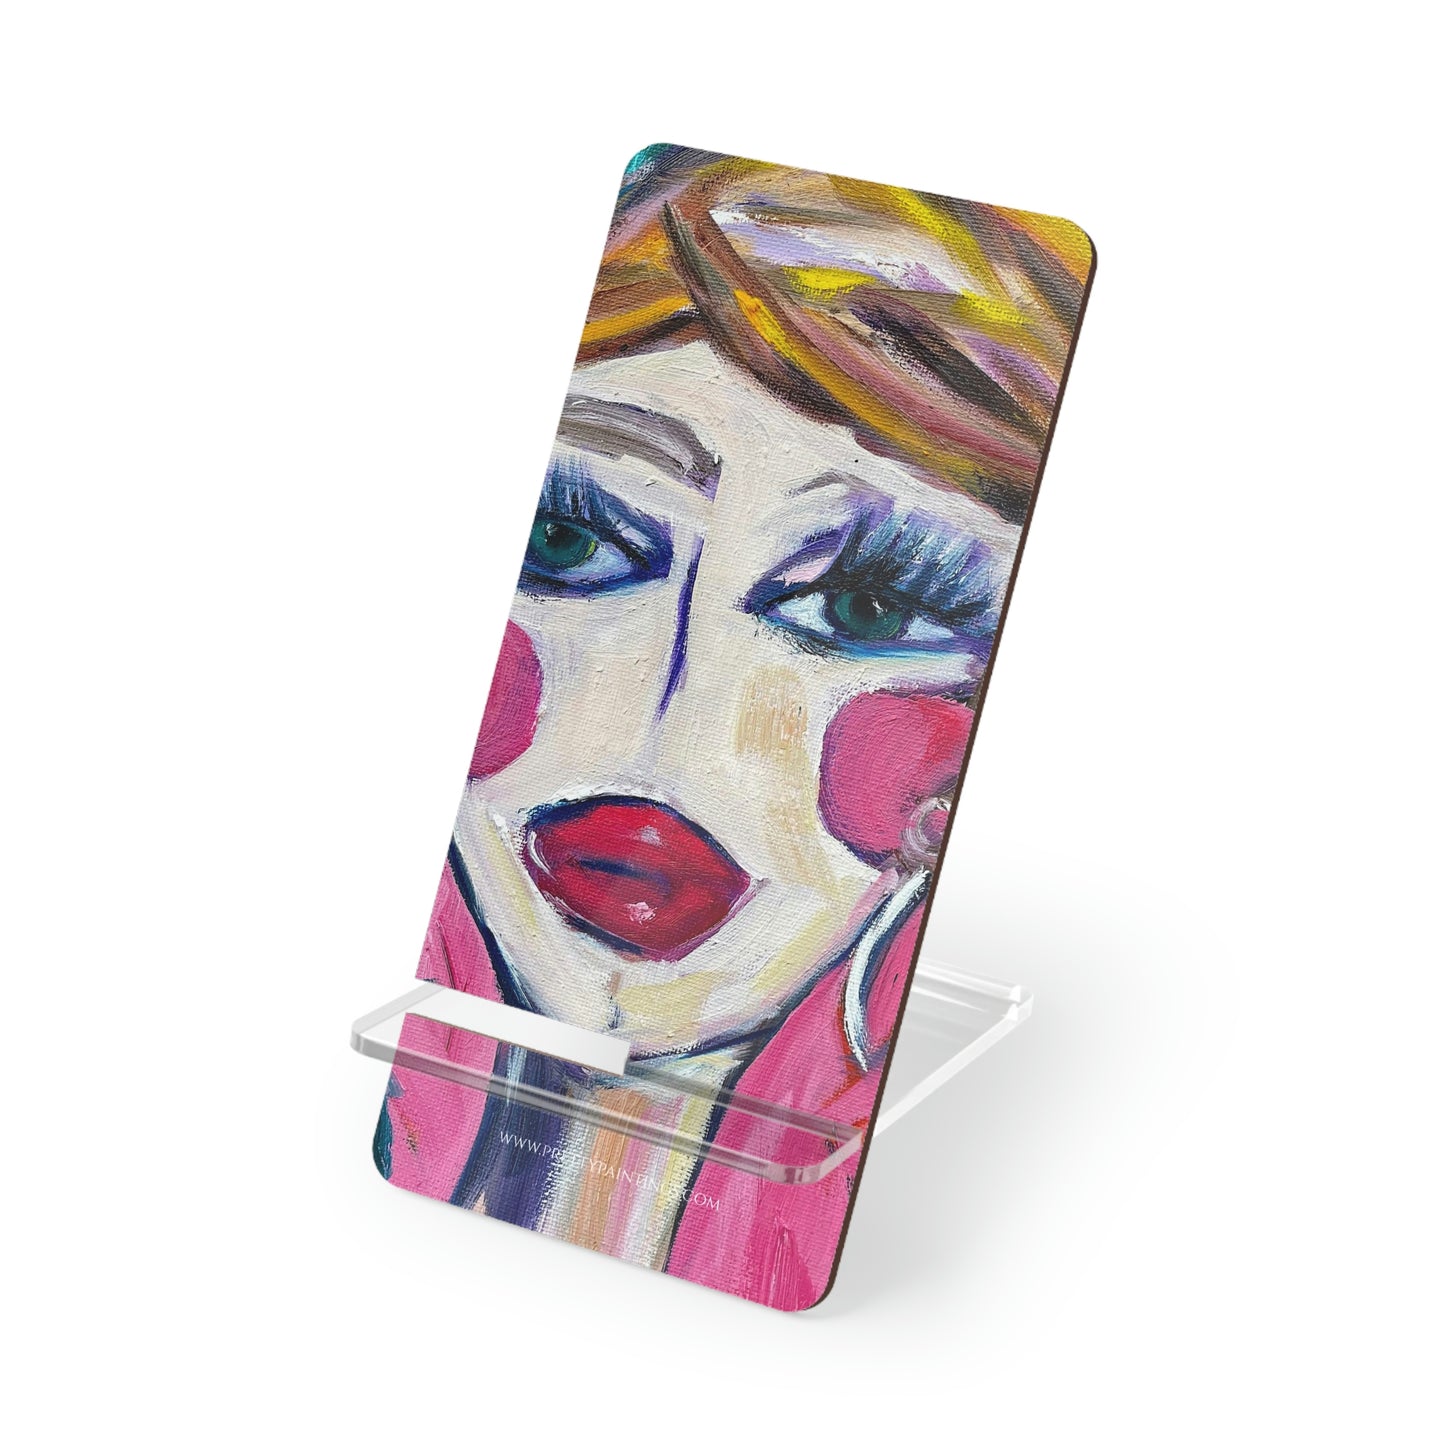 Lady with Irises-Phone Stand